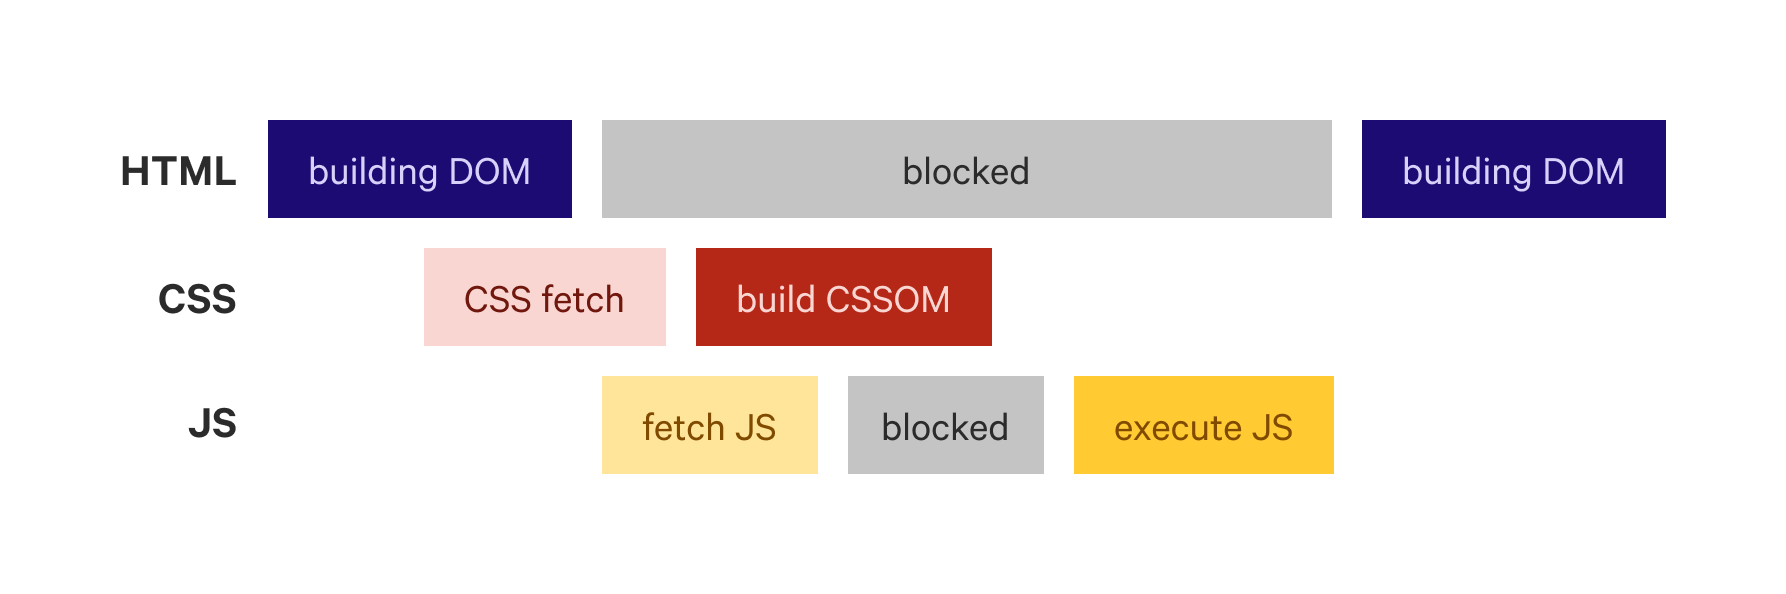 Parser blocking CSS: how CSS can block HTML parsing.